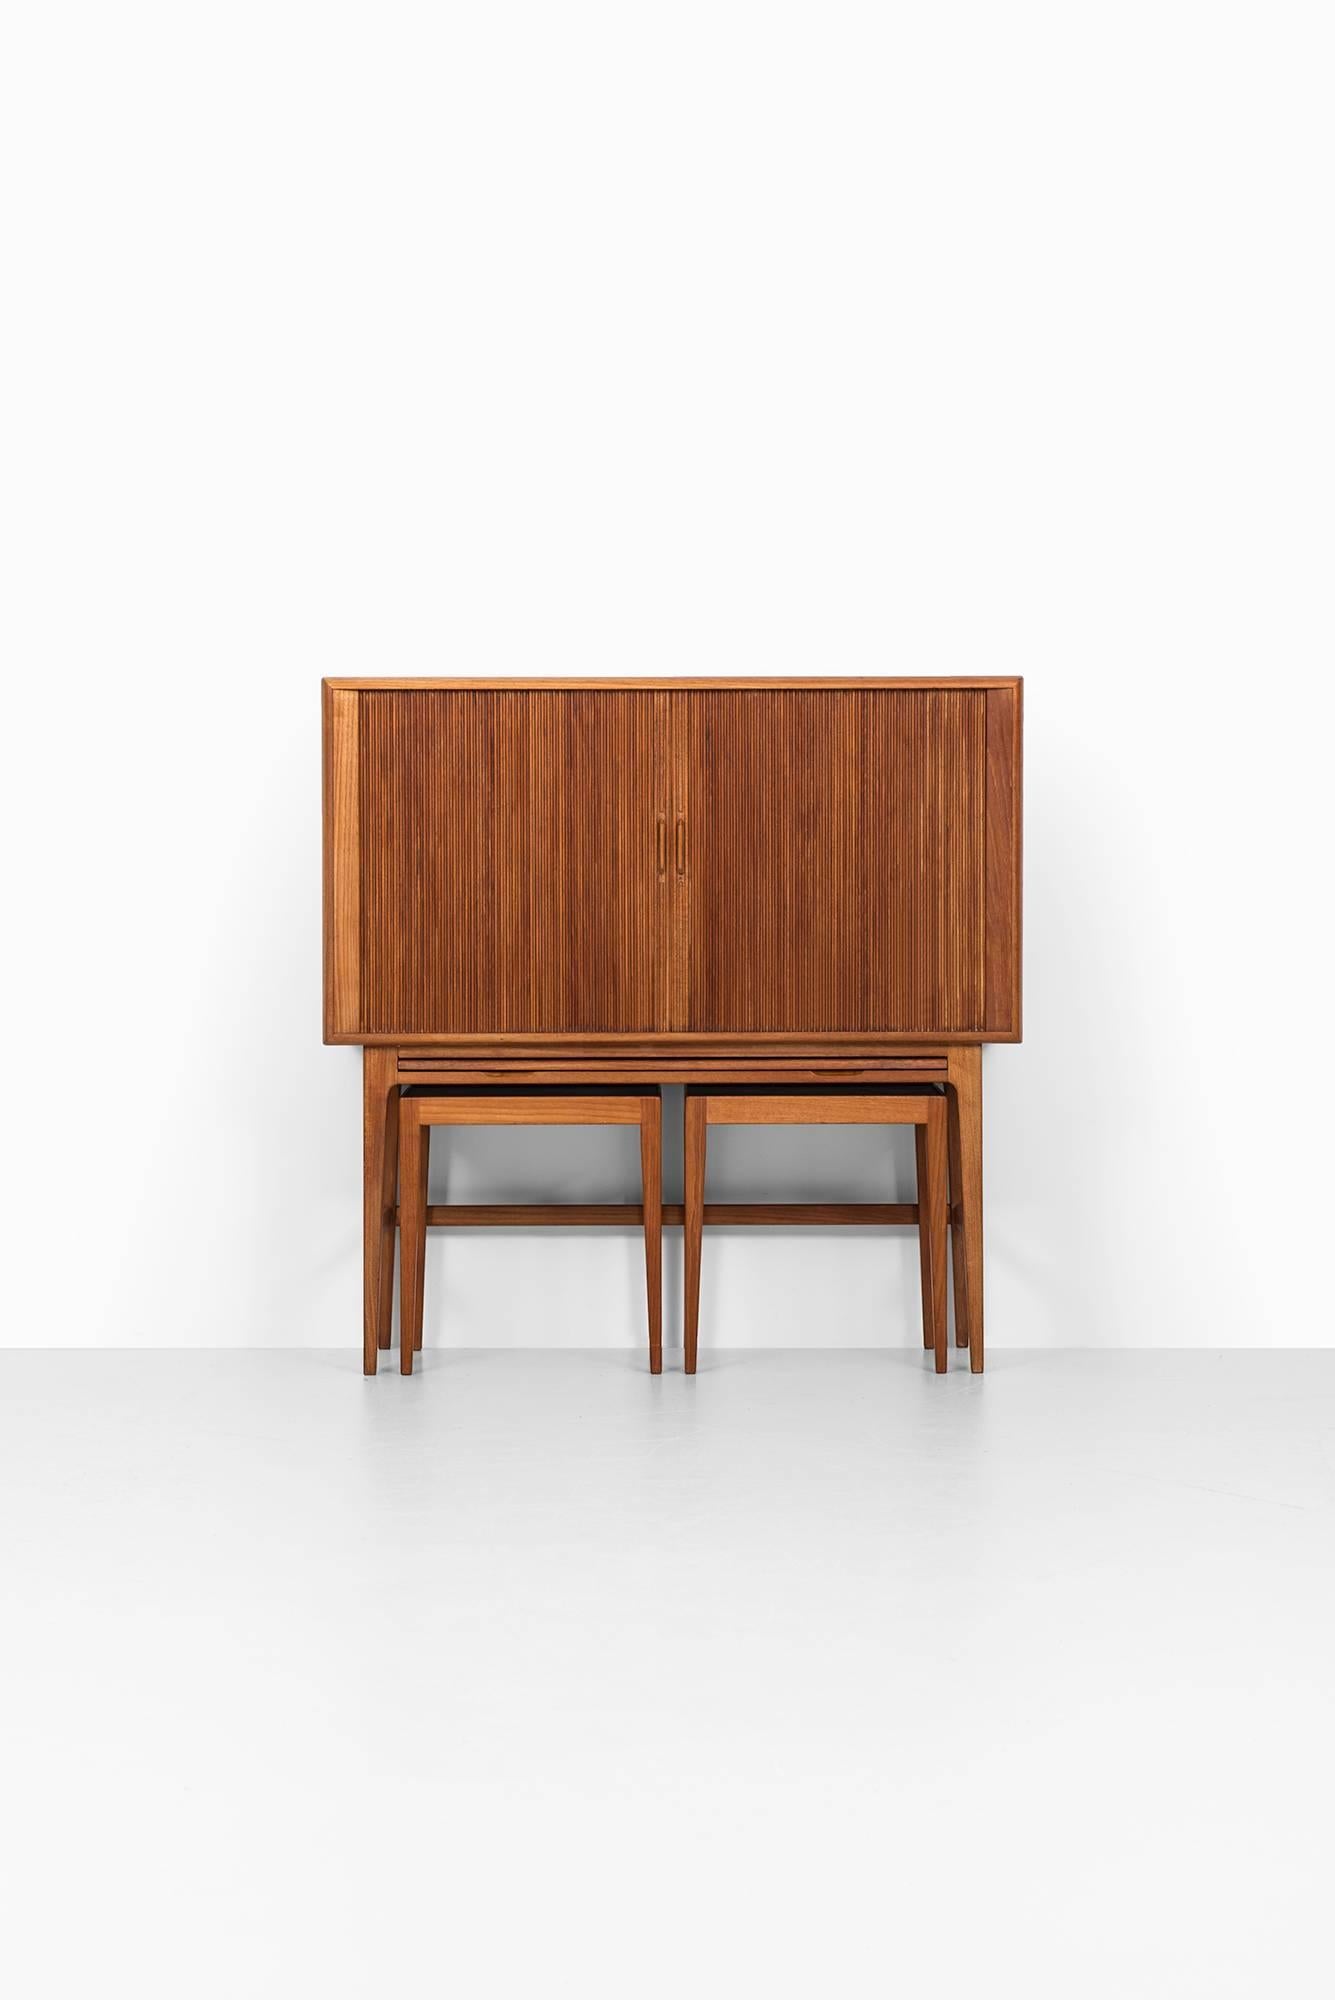 Rare bar cabinet with two side tables desigend by Kurt Østervig. Produced by K.P Møbler in Denmark.